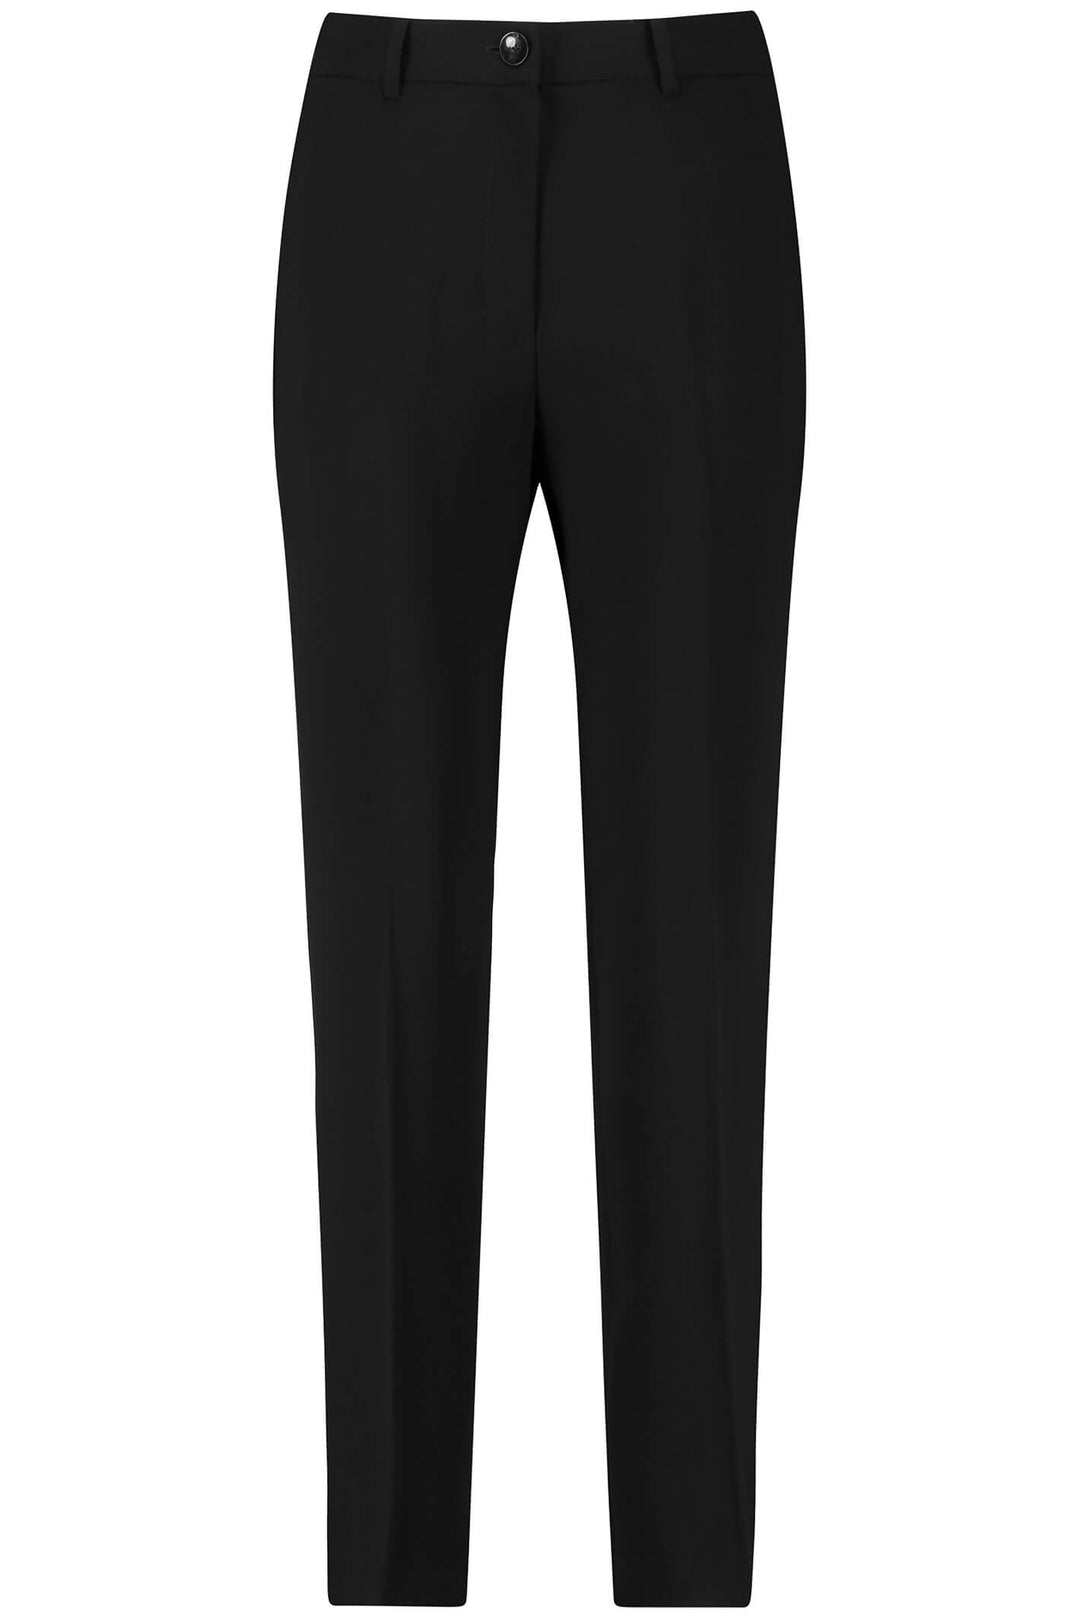 Gerry Weber 925010 Black Trousers - Experience Boutique